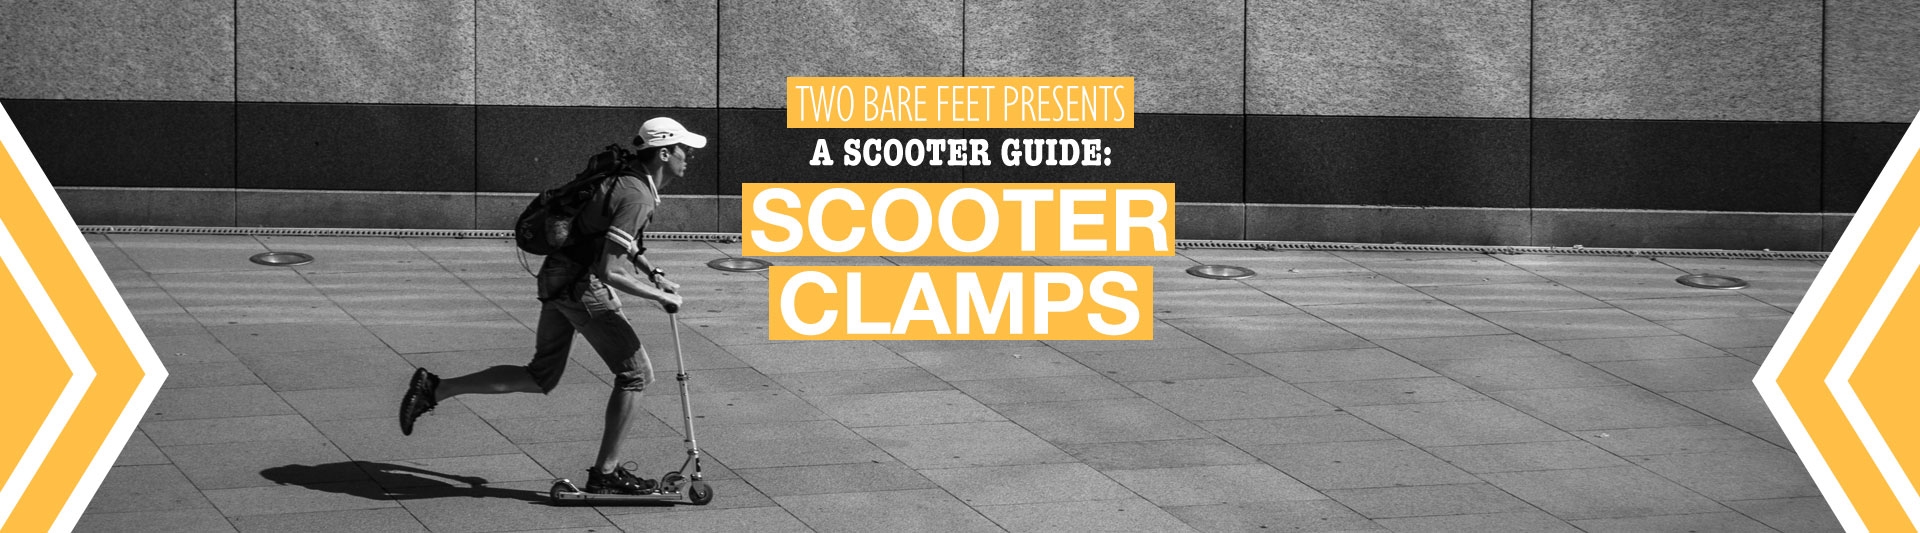 Scooter clamp banner